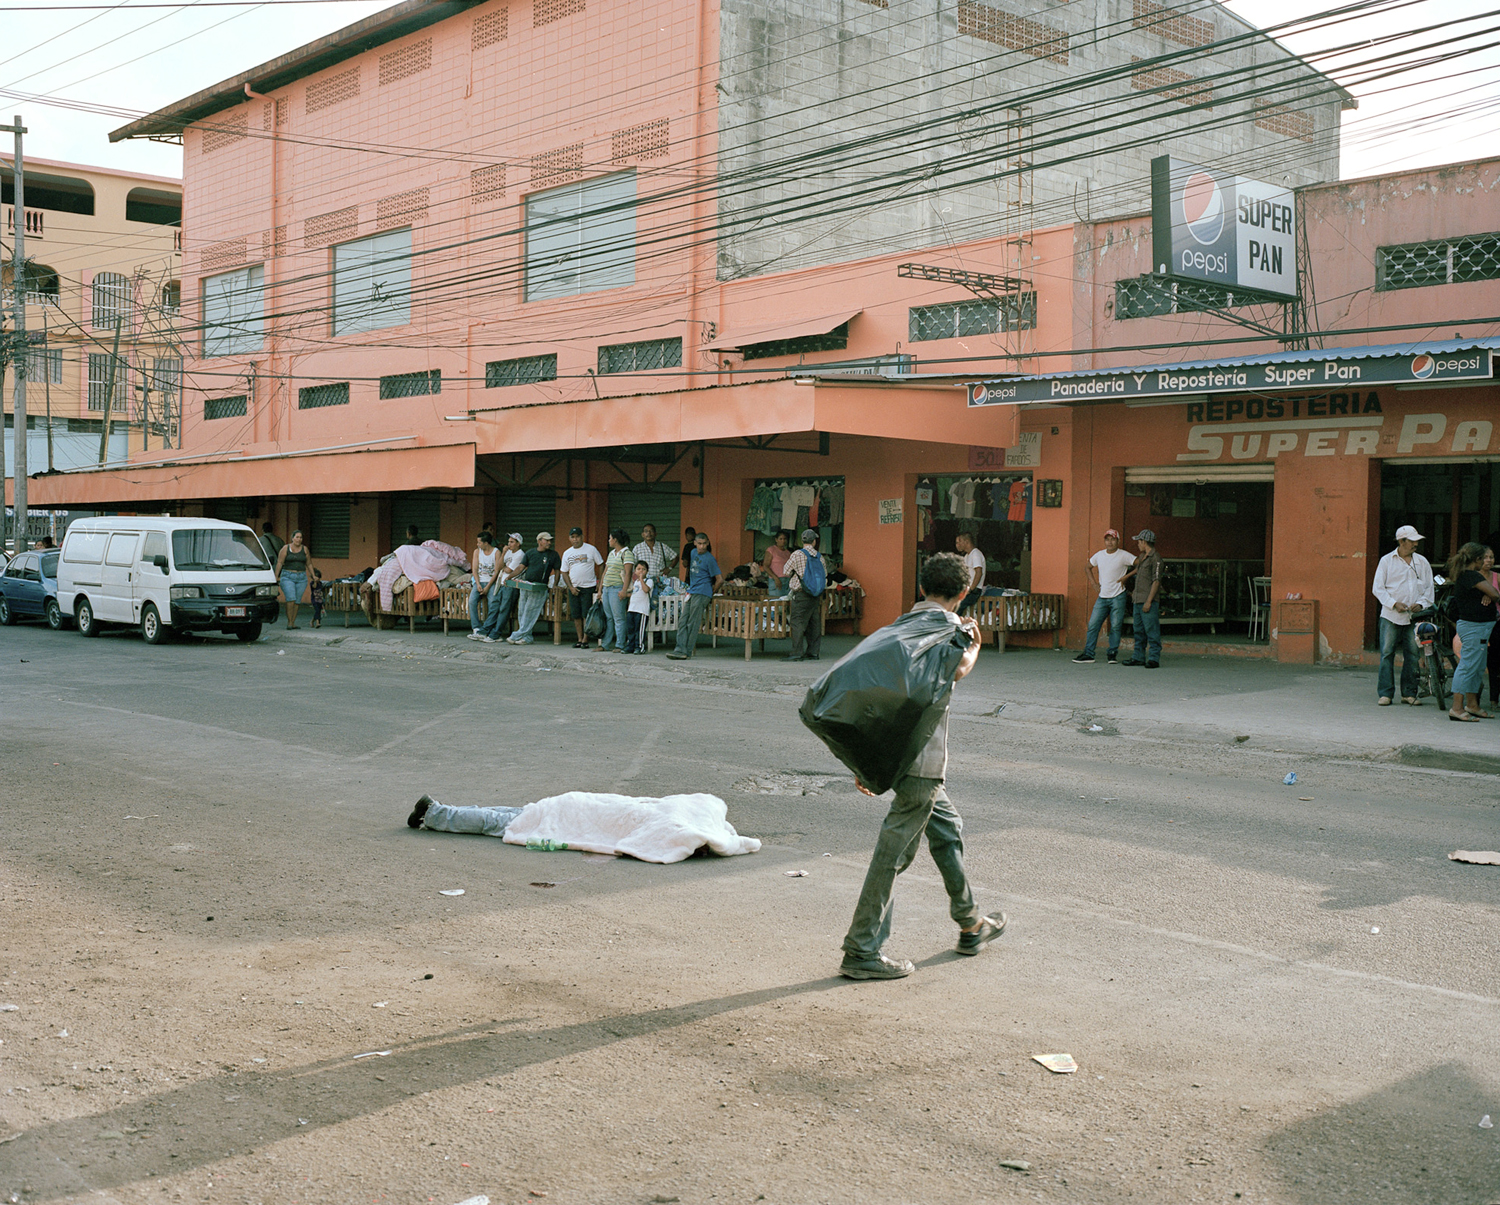  Merchants go about their business despite a body in the middle of the street in San Pedro Sula, Honduras. 